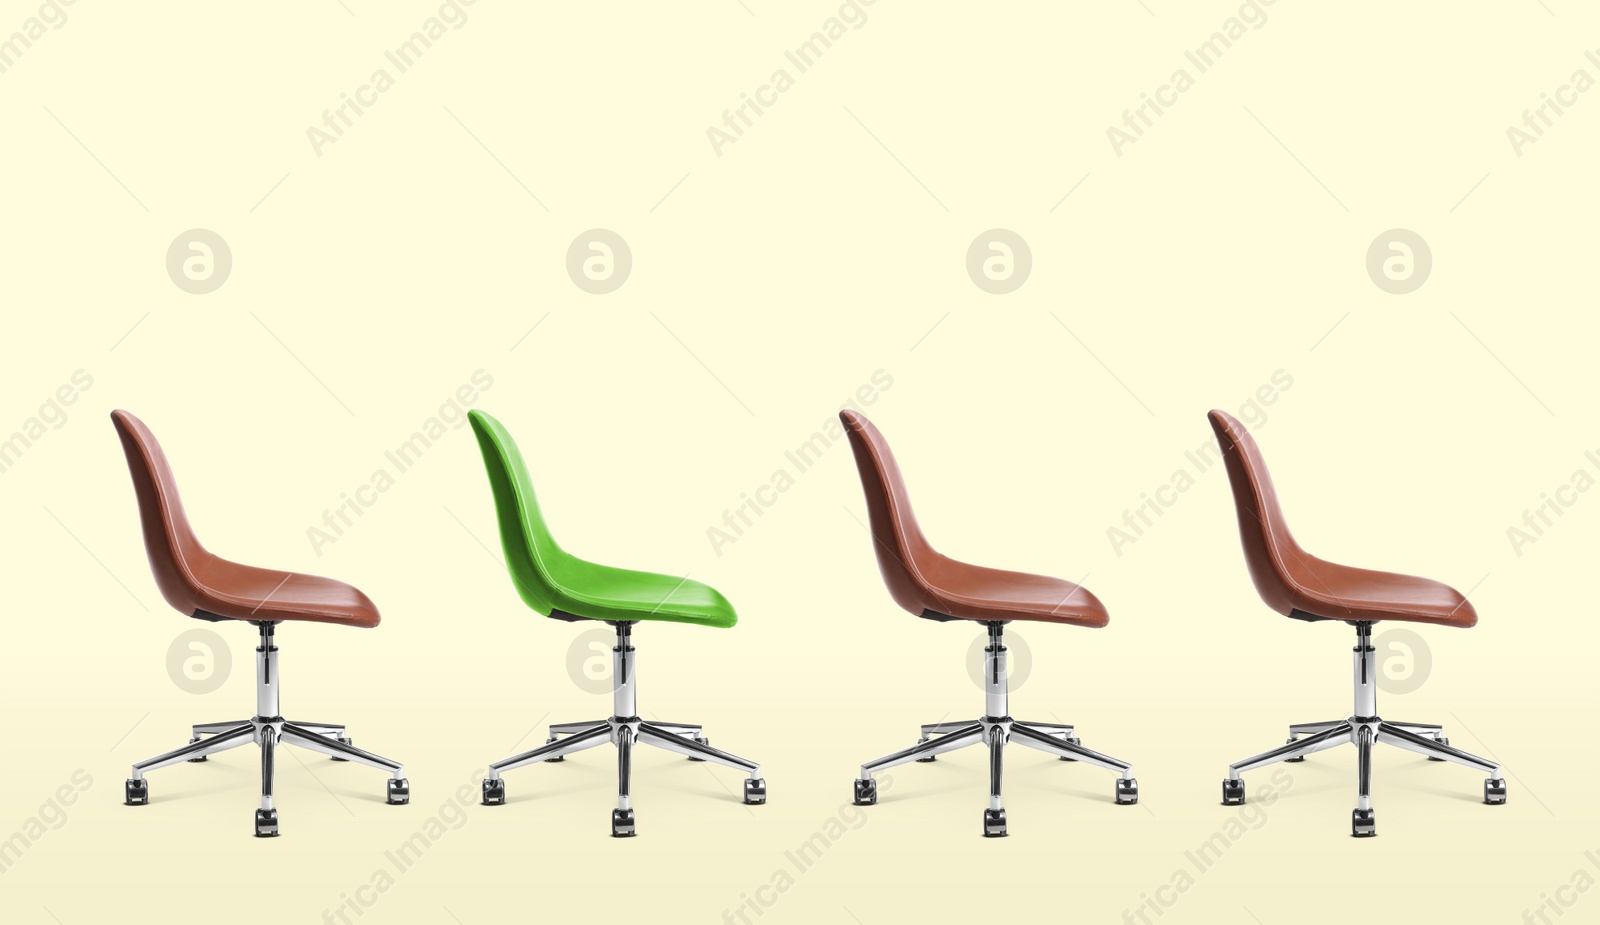 Image of Vacant position. Green office chair among brown ones on beige background, banner design